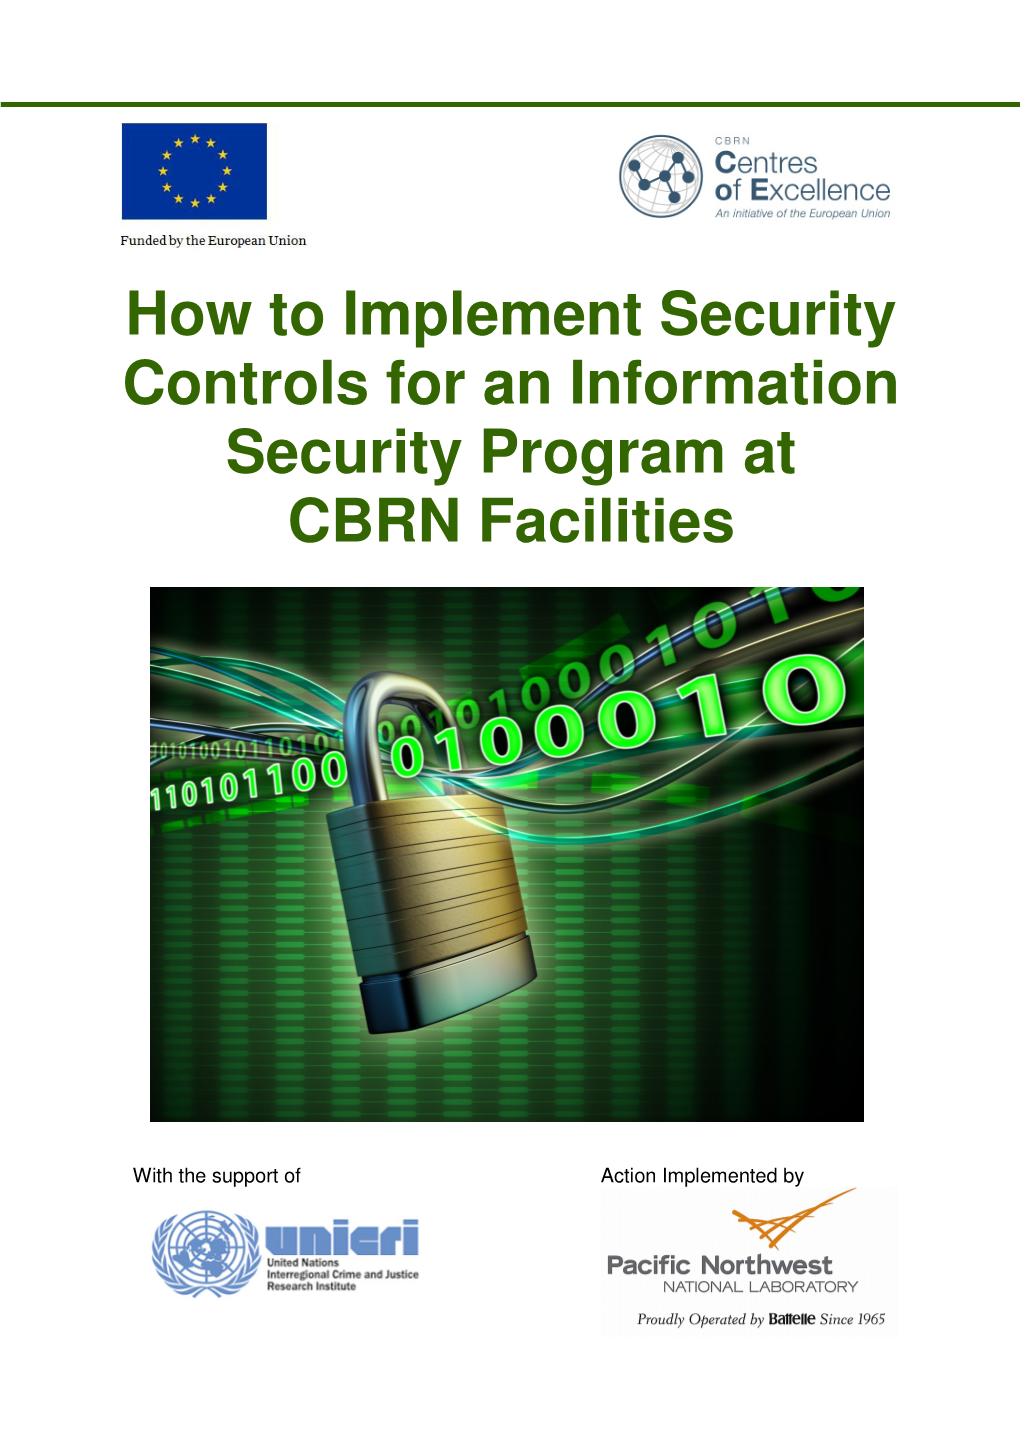 How to Implement Security Controls for an Information Security Program at CBRN Facilities